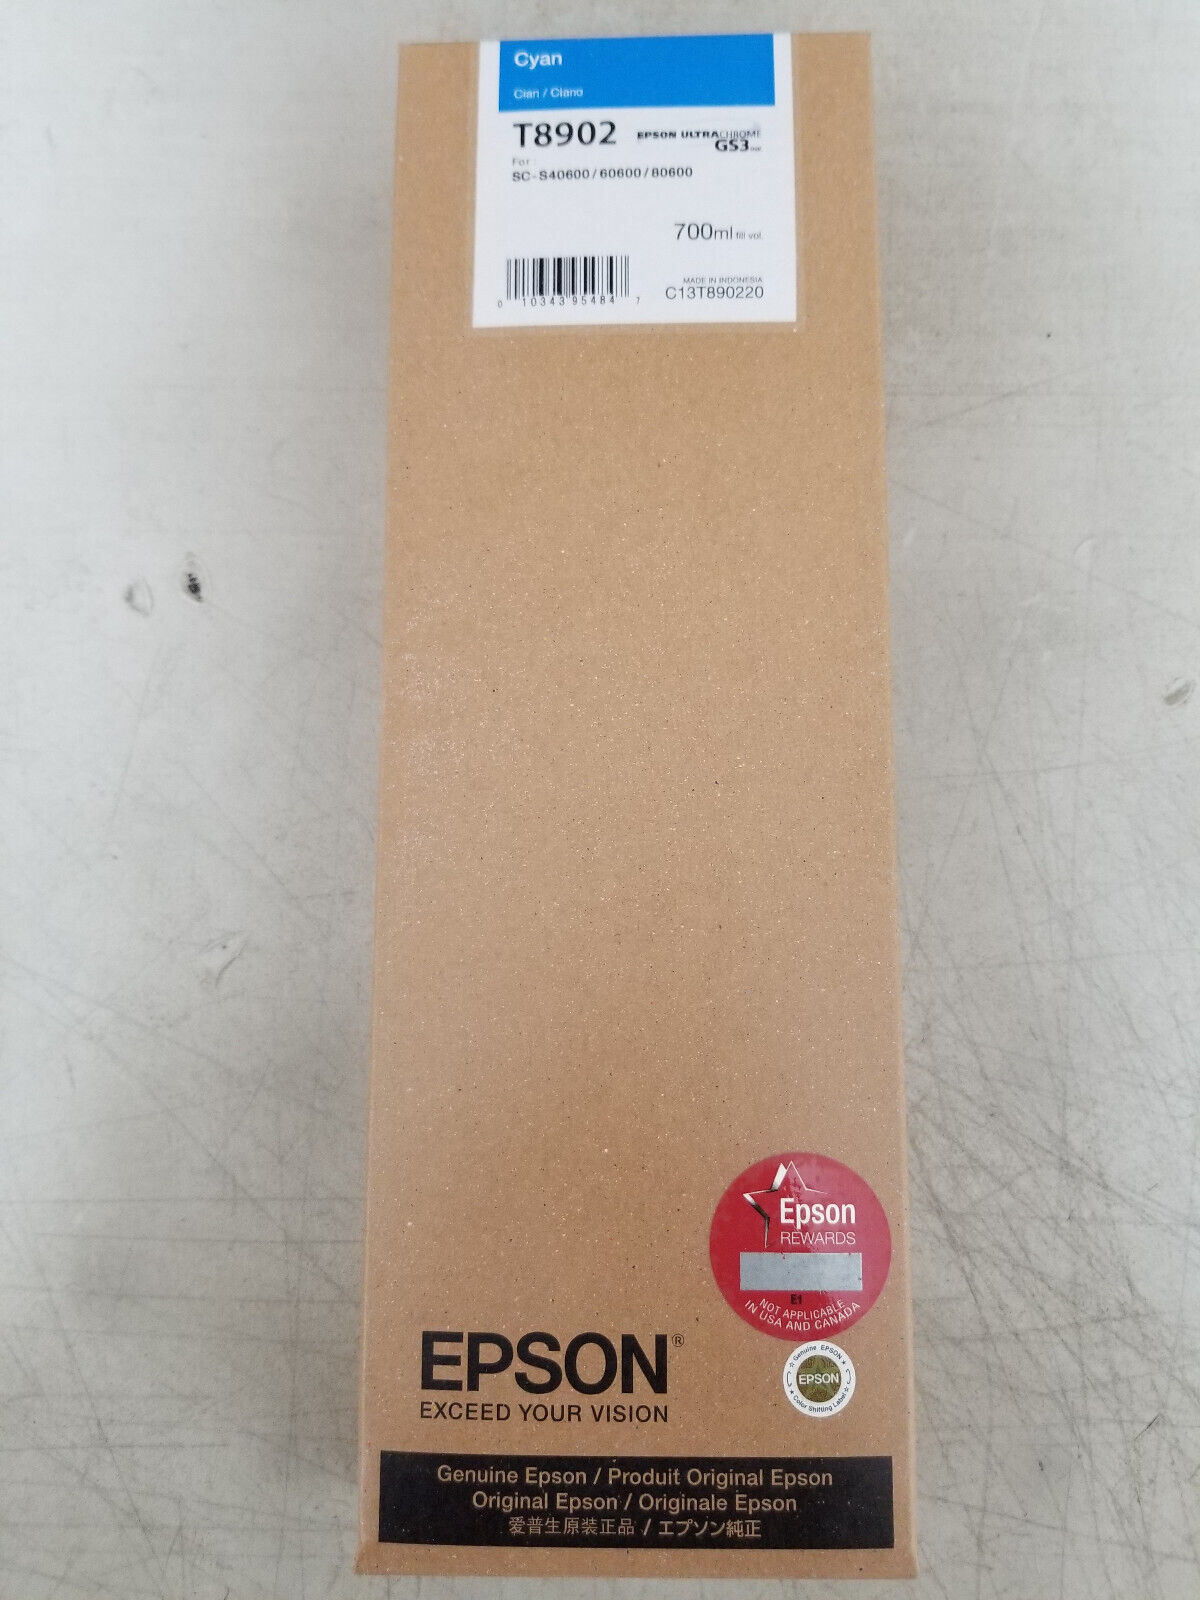 GENUINE Epson GS3 Cyan Ink 700ml (T8902) for S80600, S60600, S40600